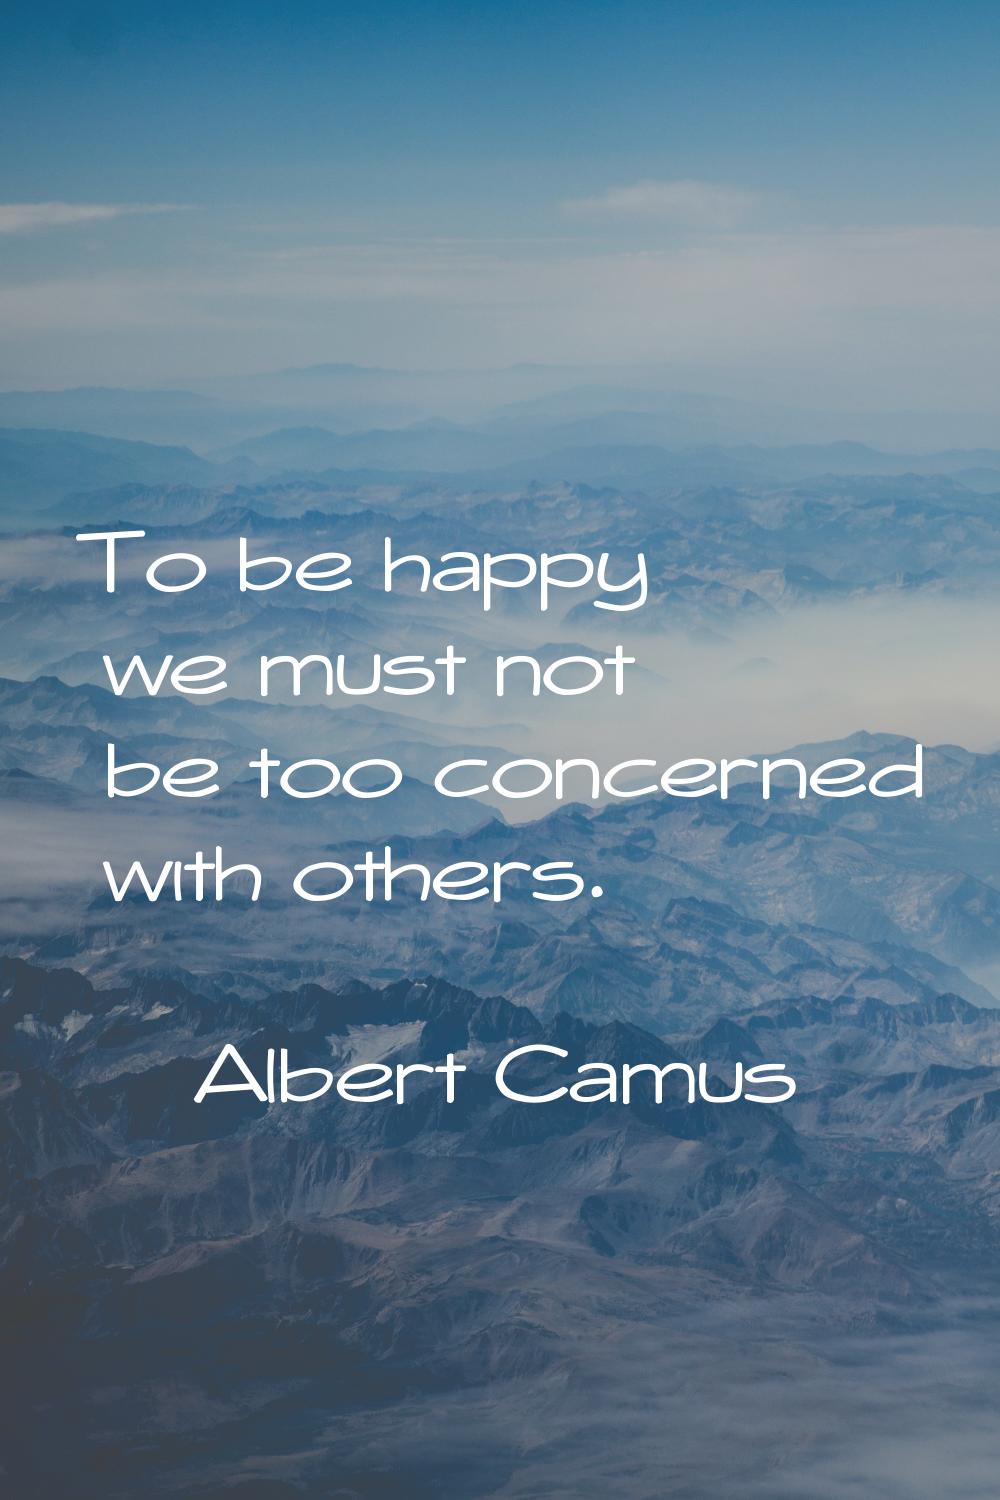 To be happy we must not be too concerned with others.